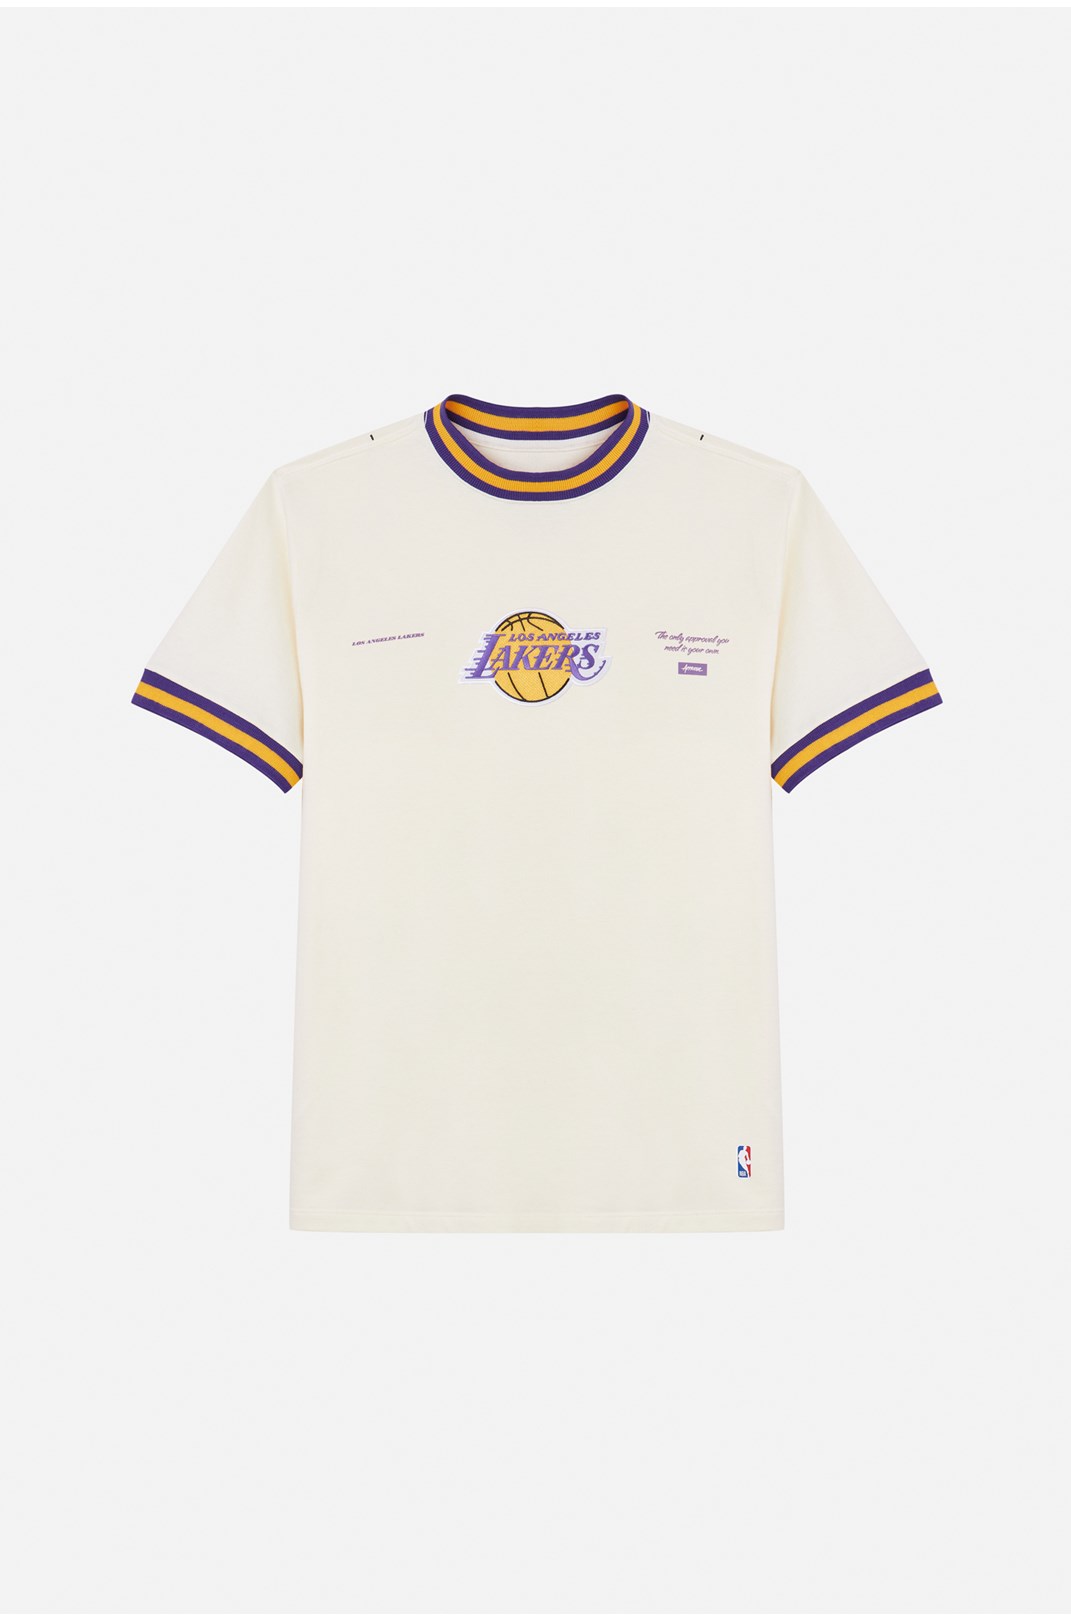 Camiseta Dystom Approve X Nba Lakers Off White